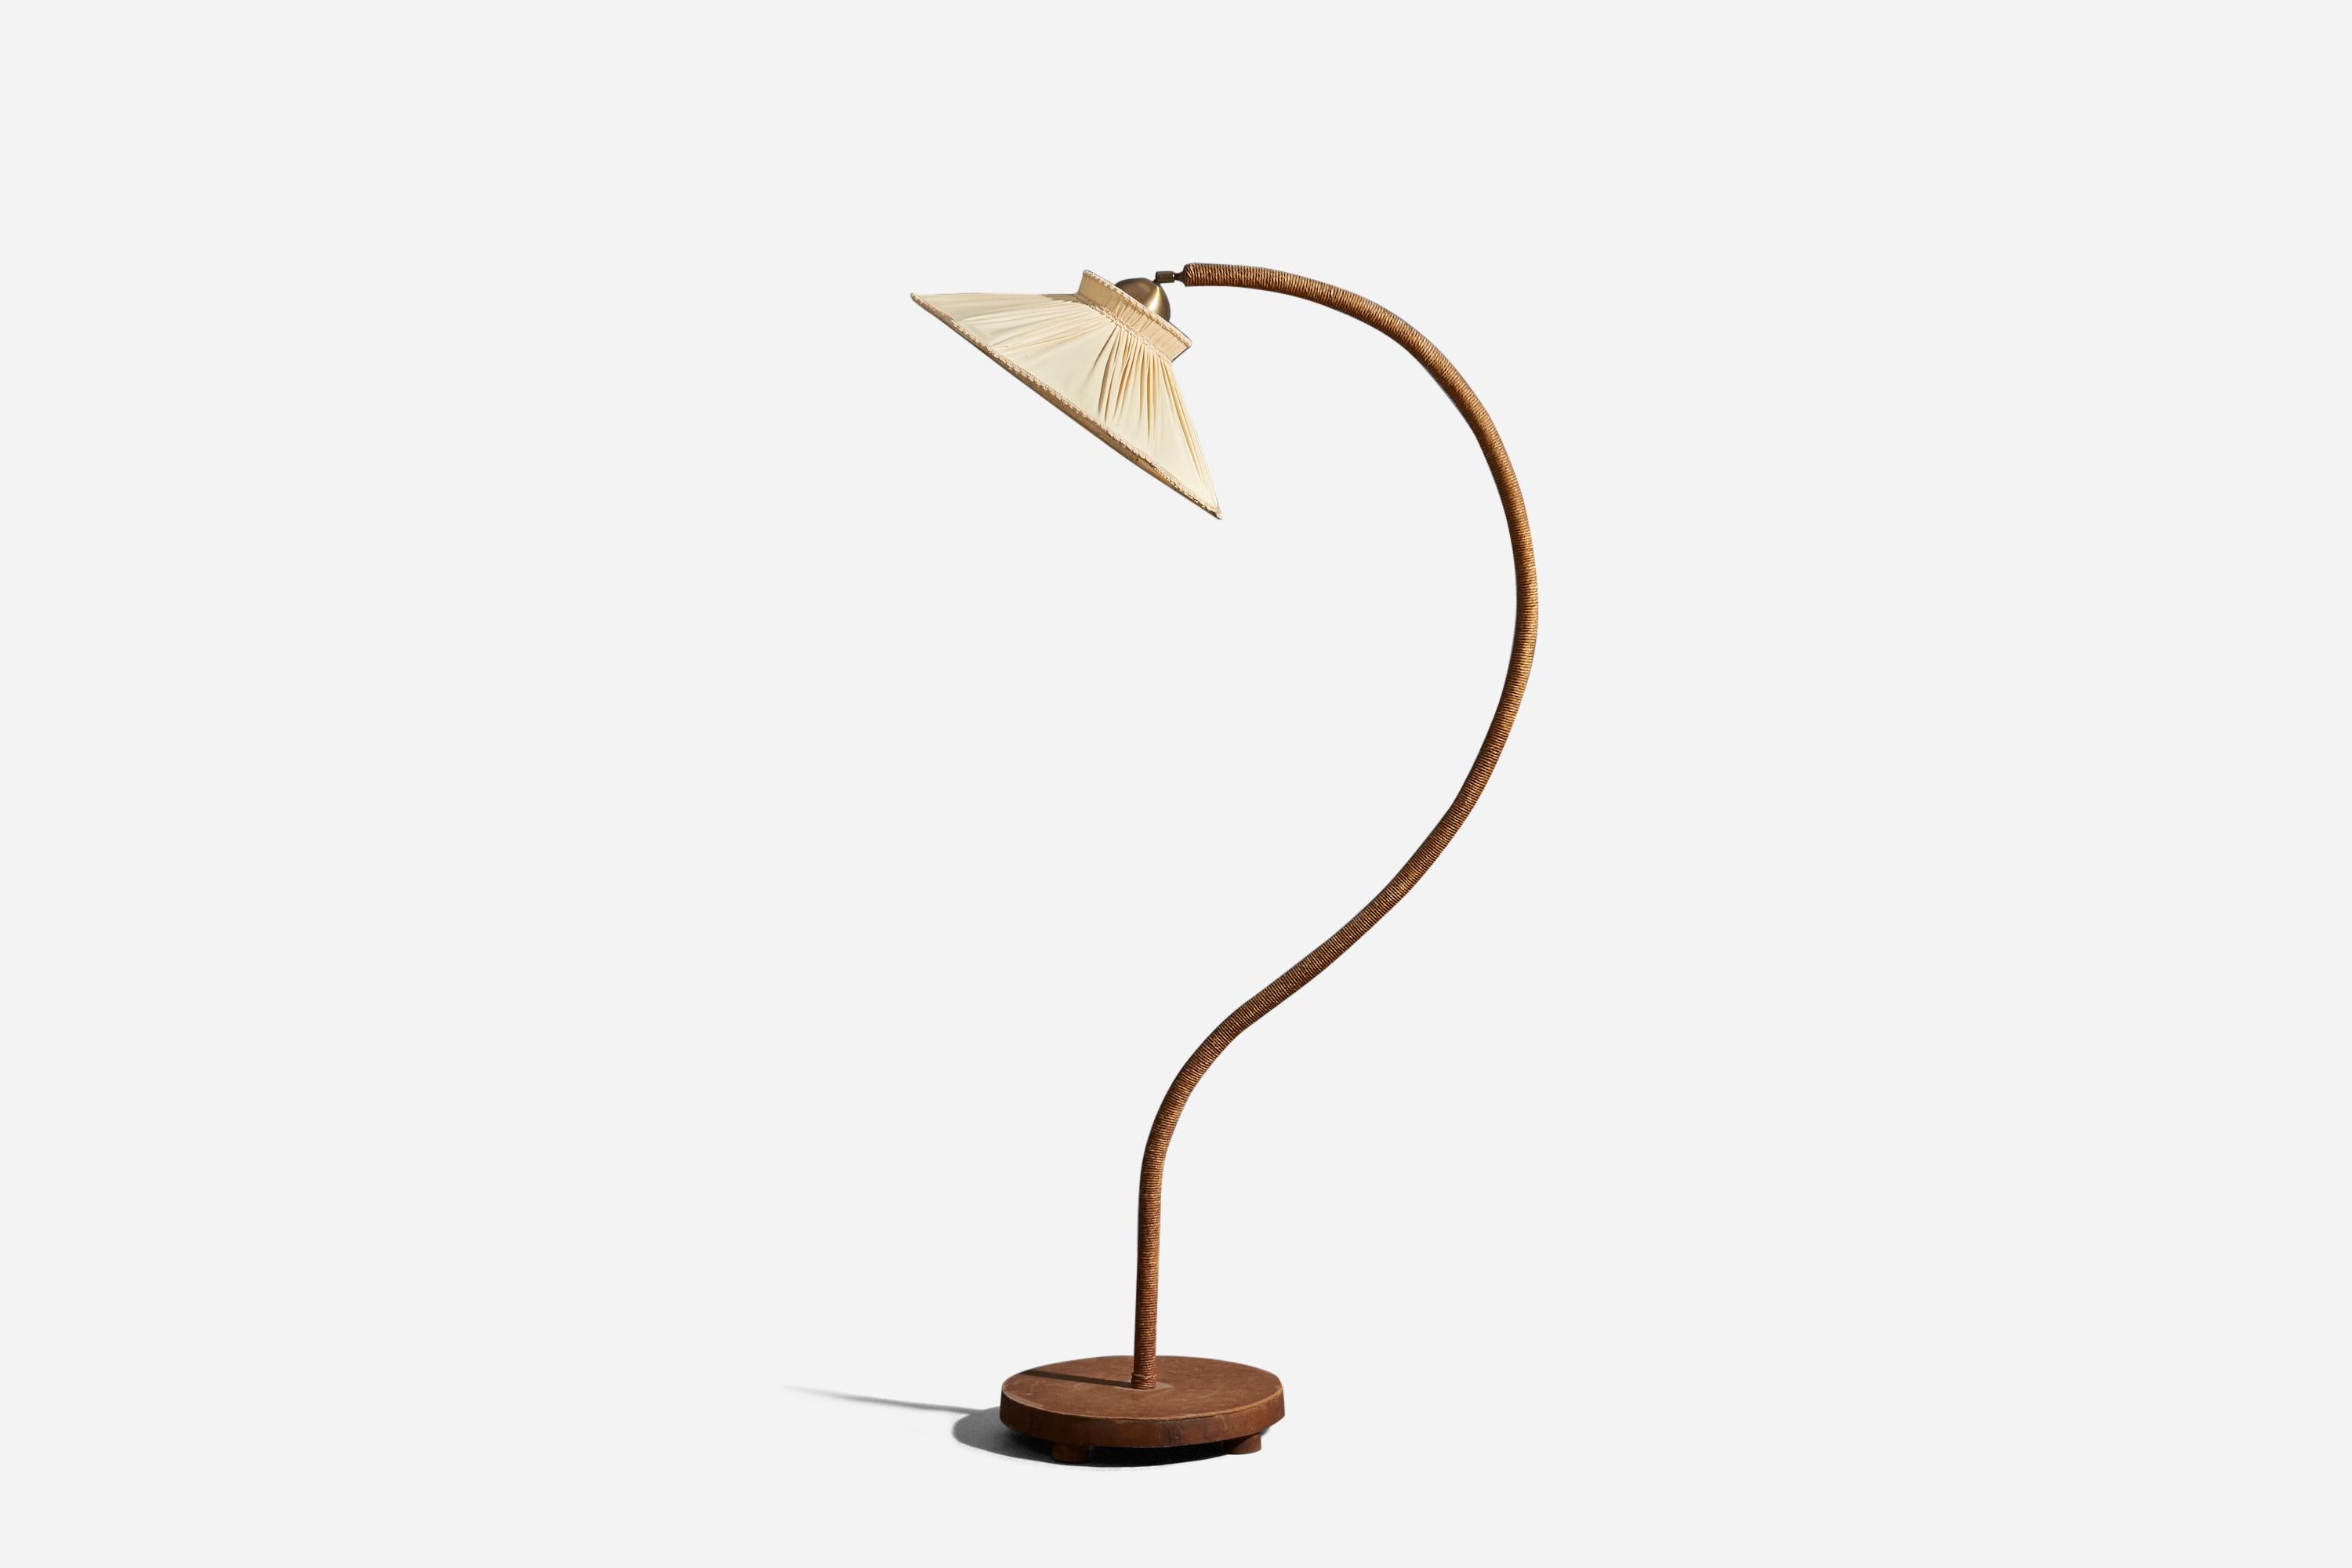 An adjustable, wood, cord and fabric floor lamp designed and produced in Sweden, 1930s.

Dimensions variable, measured as illustrated in first image.

Sold with Lampshade. Dimensions stated are of Floor Lamp with Lampshade. 

Socket takes